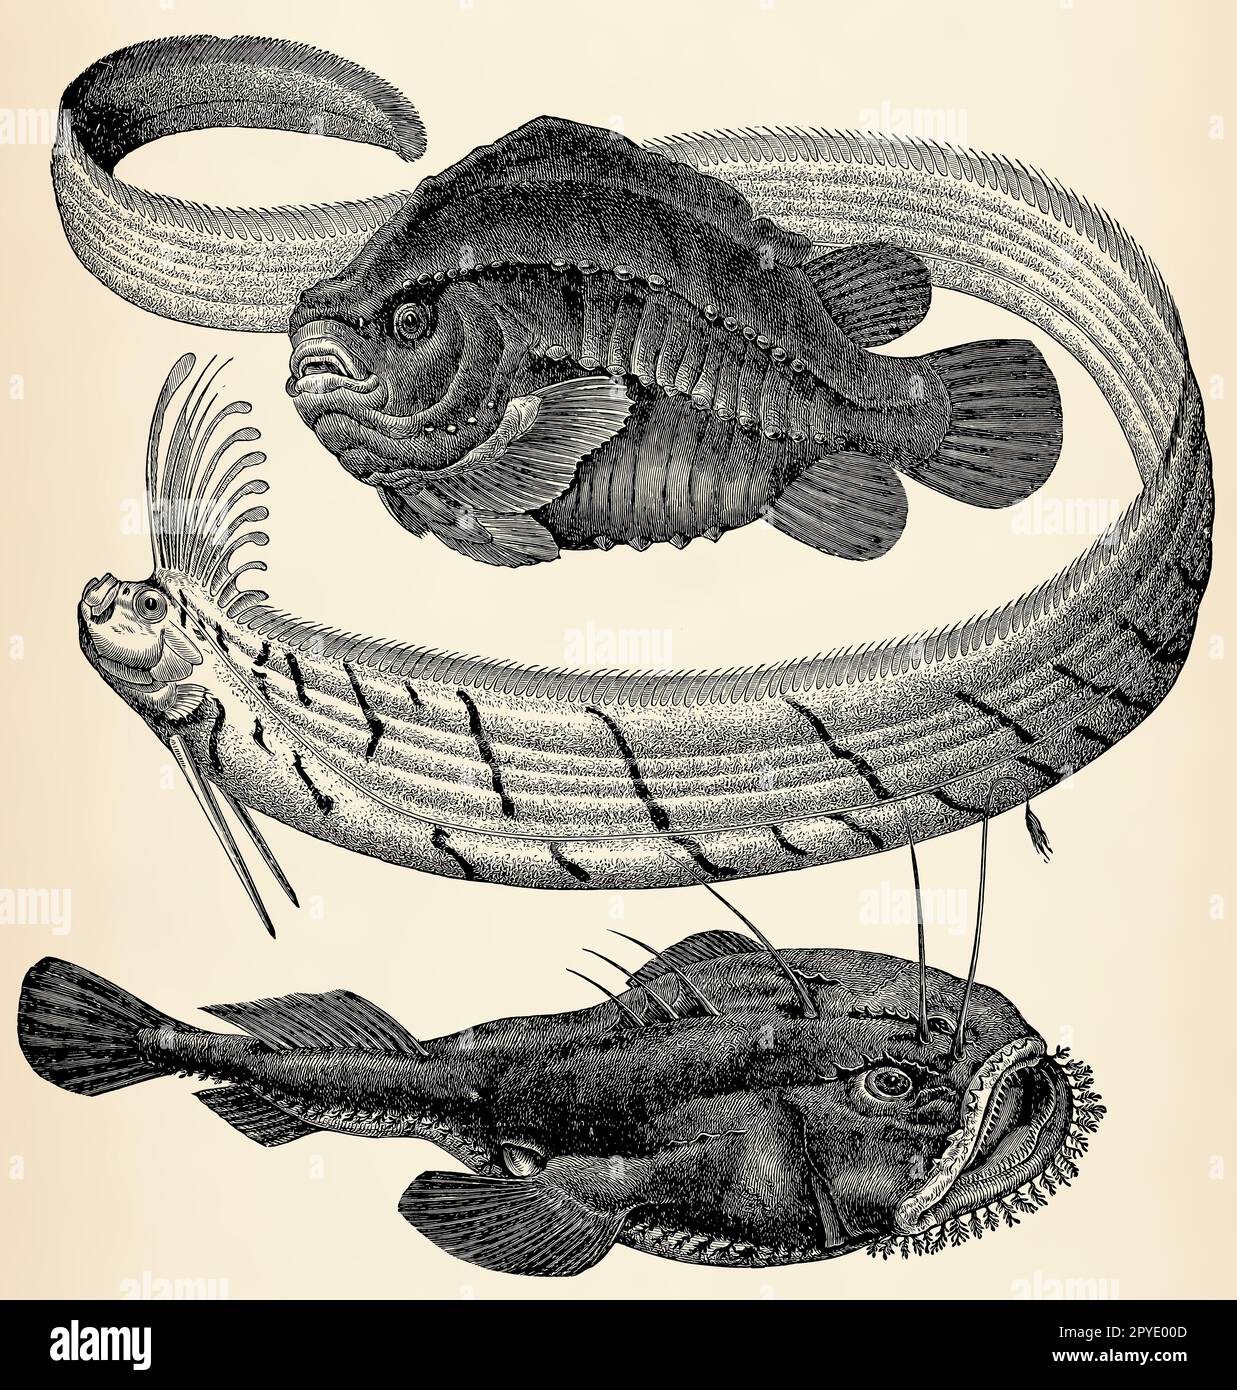 The fishes -  Cyclopterus lumpus, Giant oarfish (Regalecus glesne) and Lophius piscatorius. Antique stylized illustration. Stock Photo